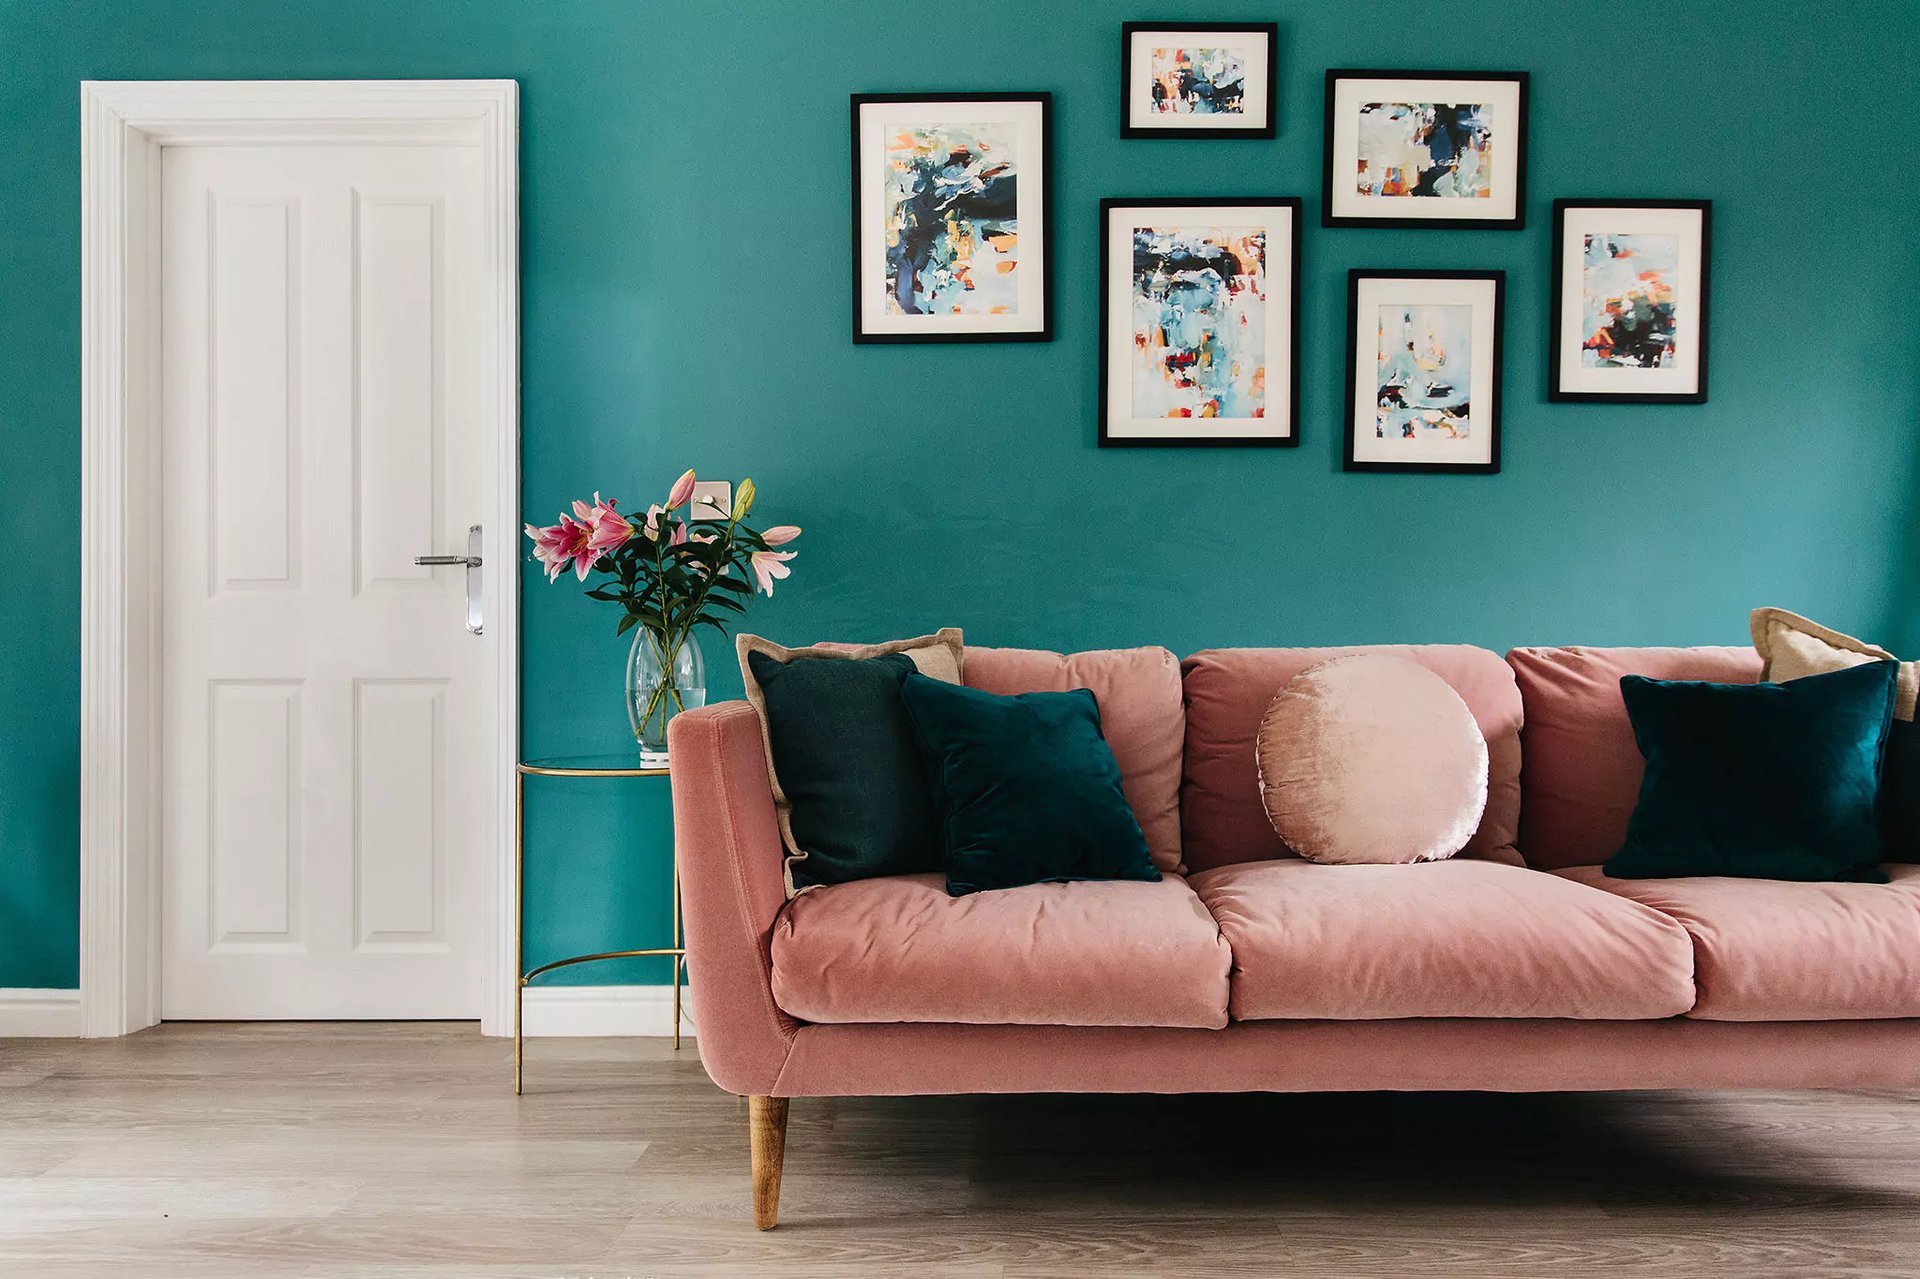 Turquoise and pink living room